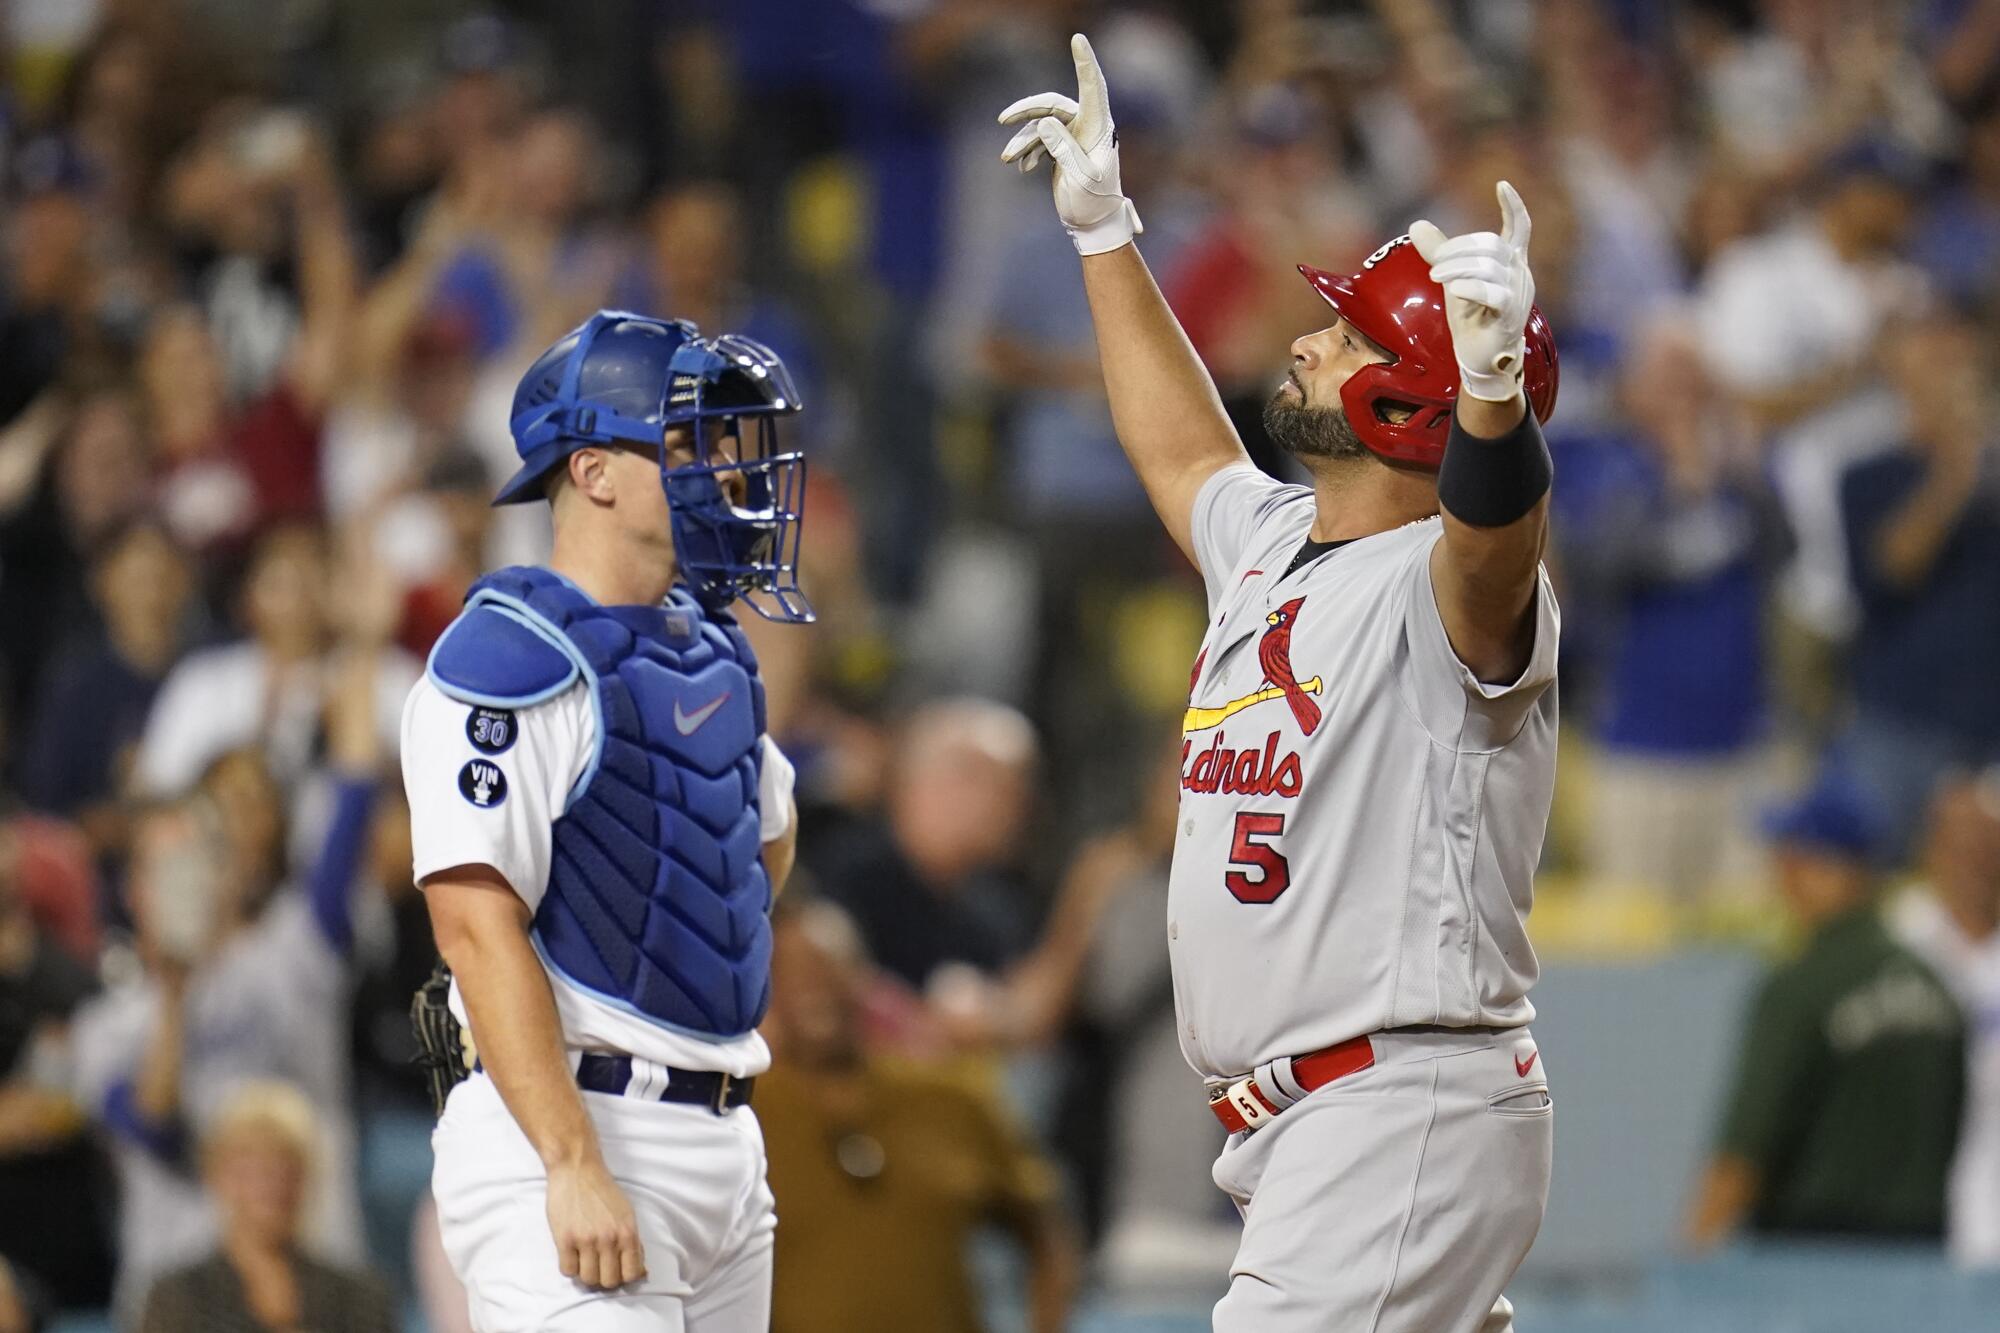 Albert Pujols raises his arms to the sky as he crosses home plate after hitting his 699th career home run against the Dodgers